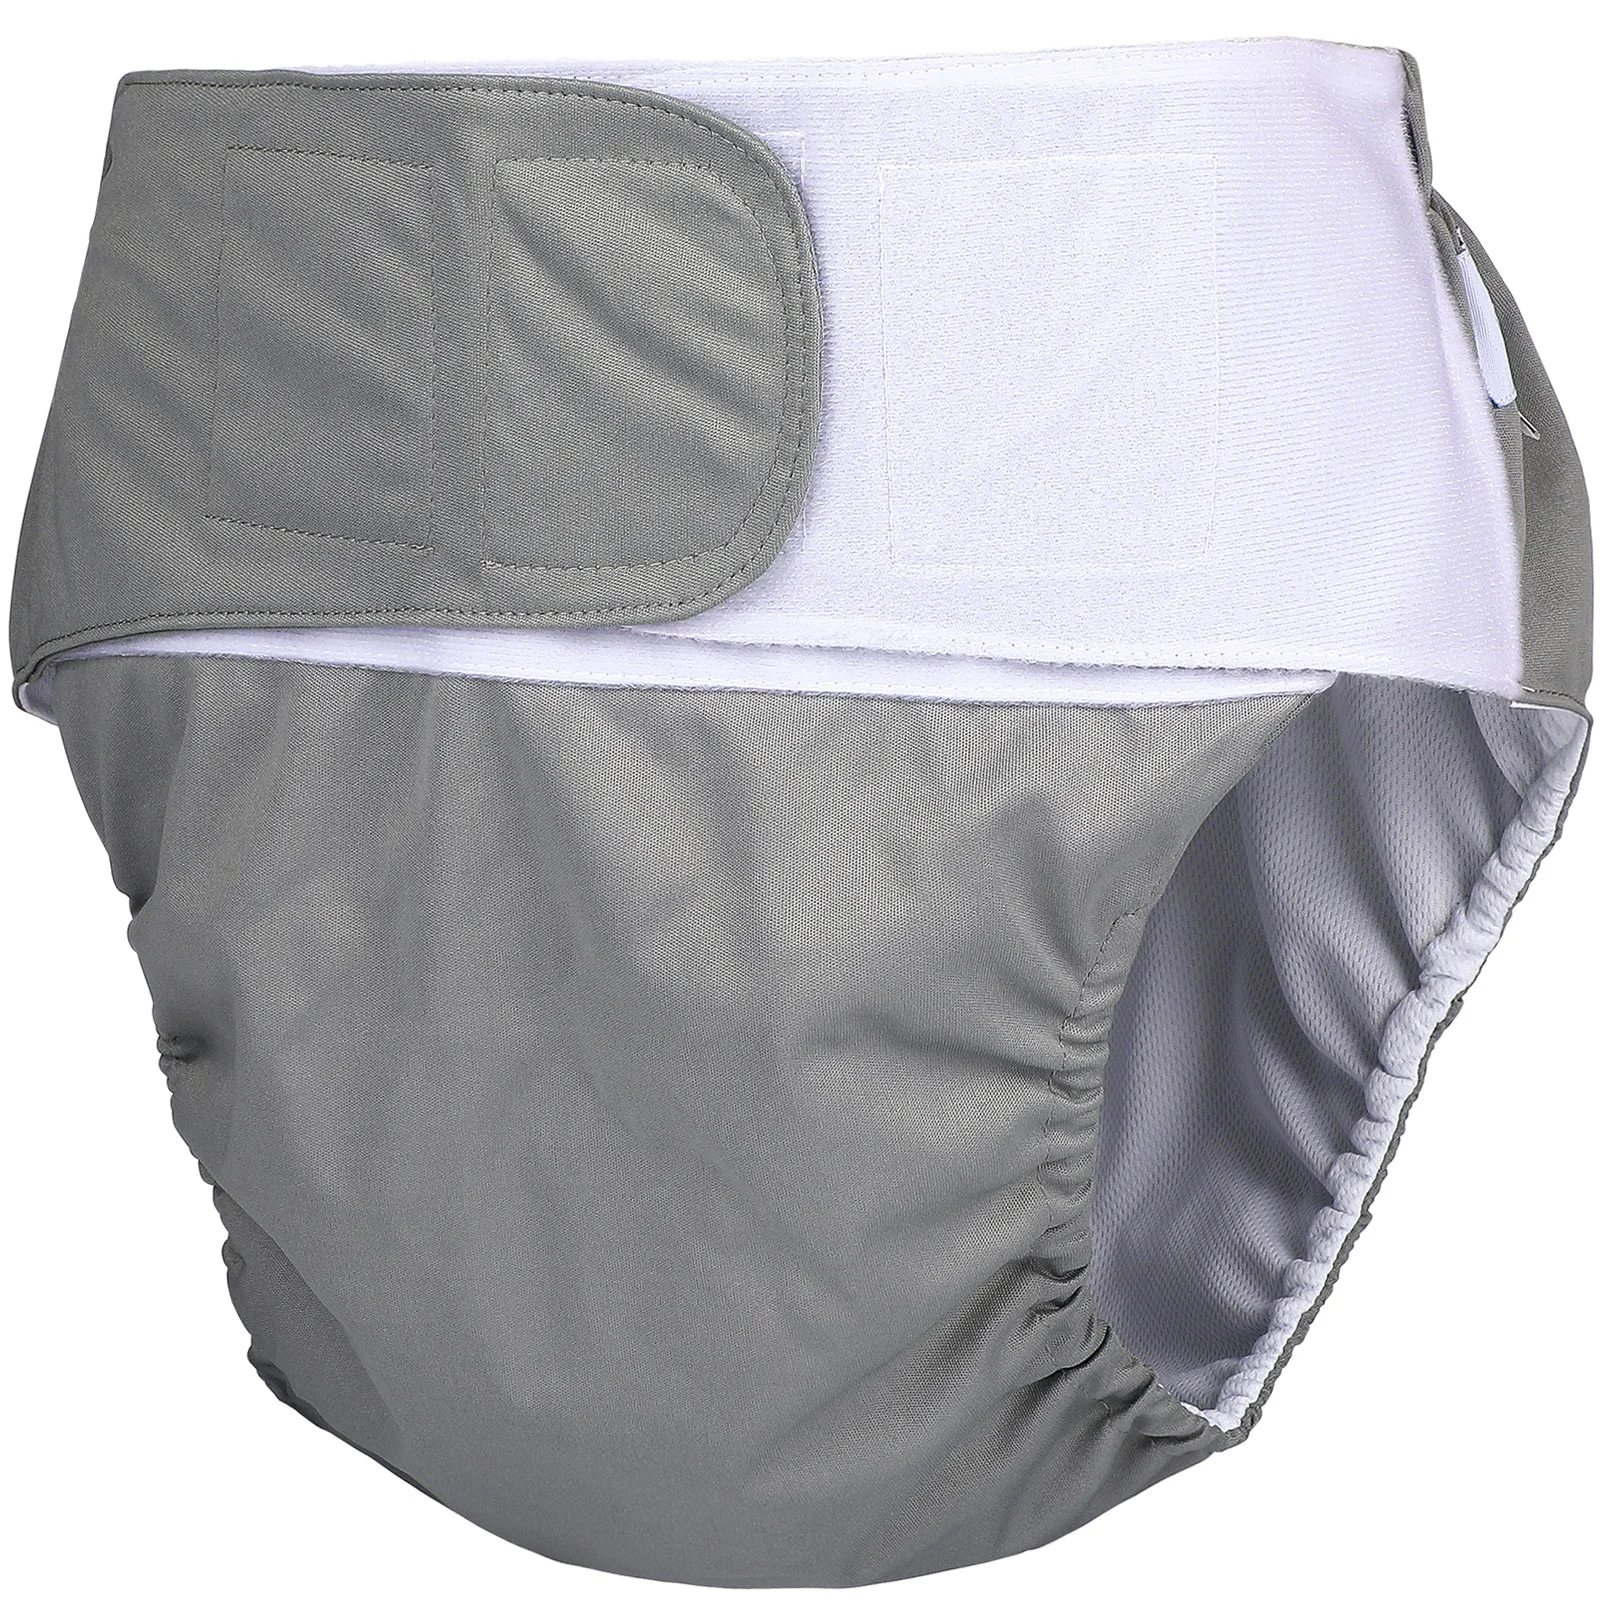 

Leak-free Diaper Adult Diapers Adults Reusable Nappies Clothing Mens Women Swim Oversized